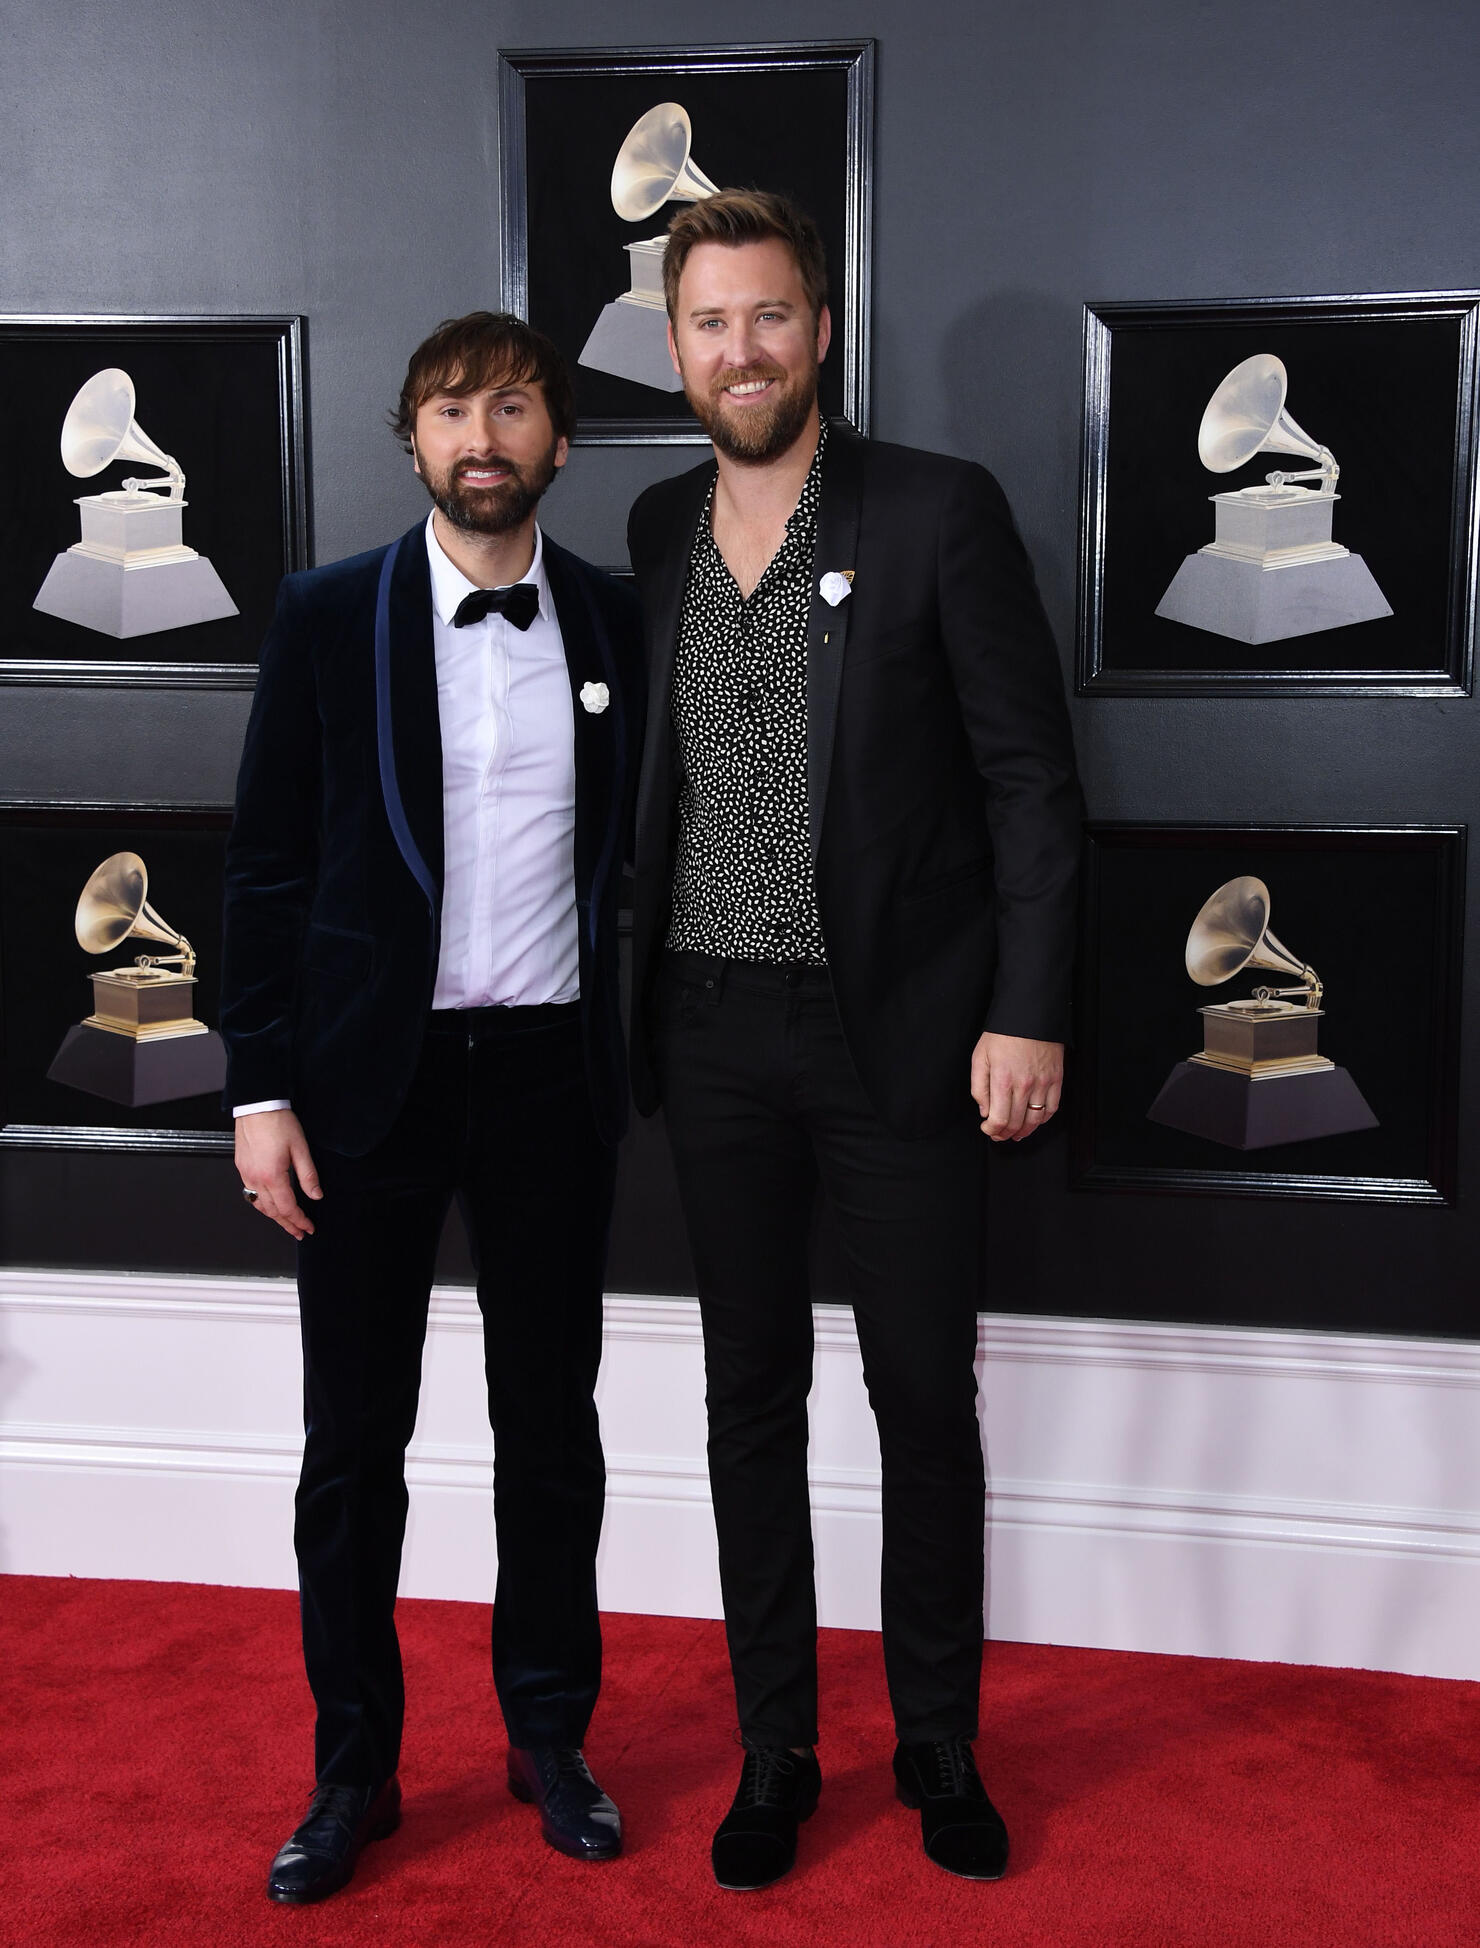 Lady Antebellum's Charles Kelley and Dave Haywood (Getty Images)